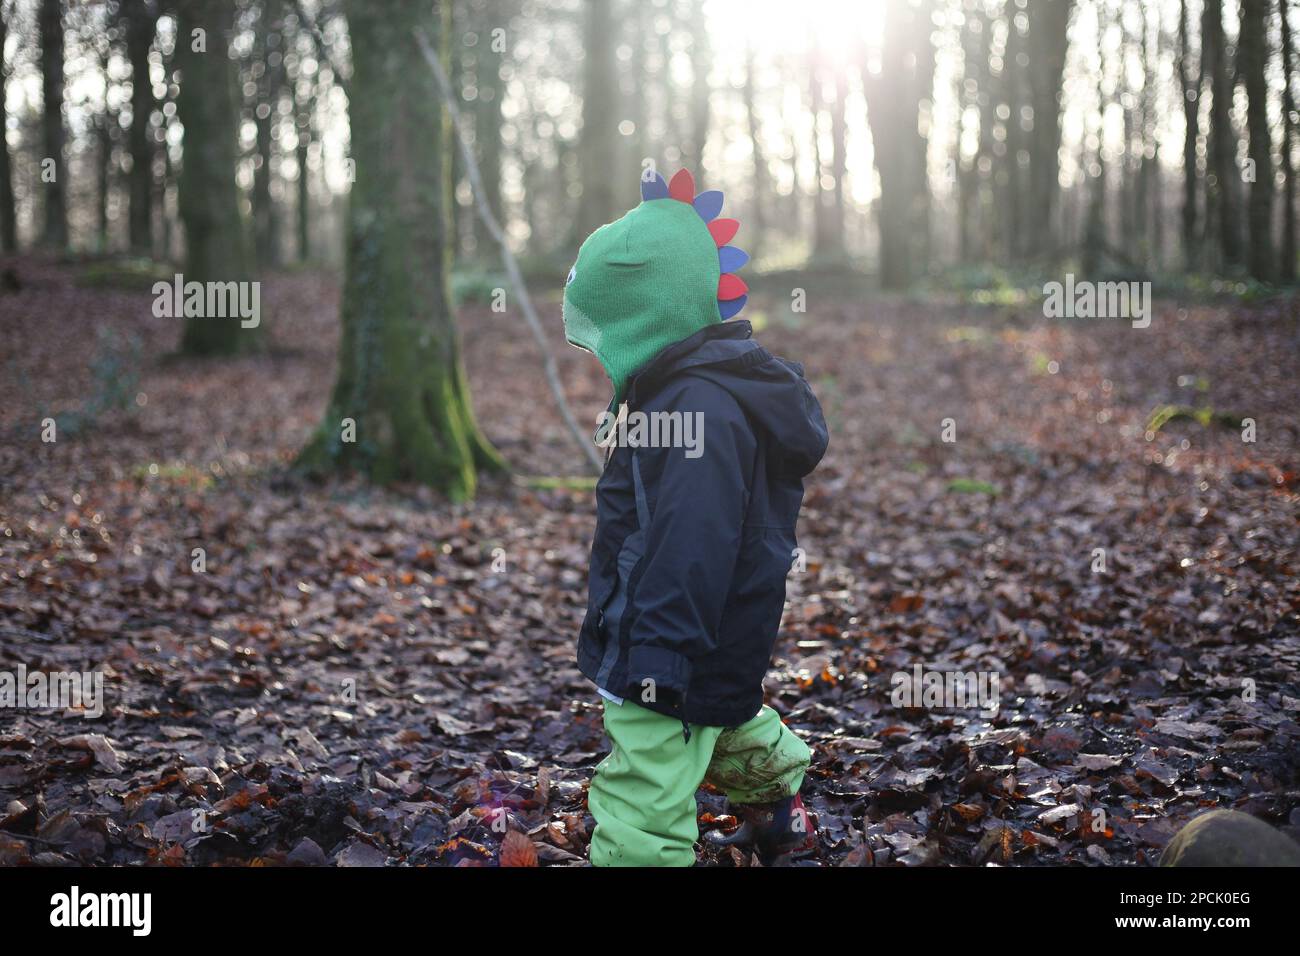 Toddler walking in the woods Stock Photo